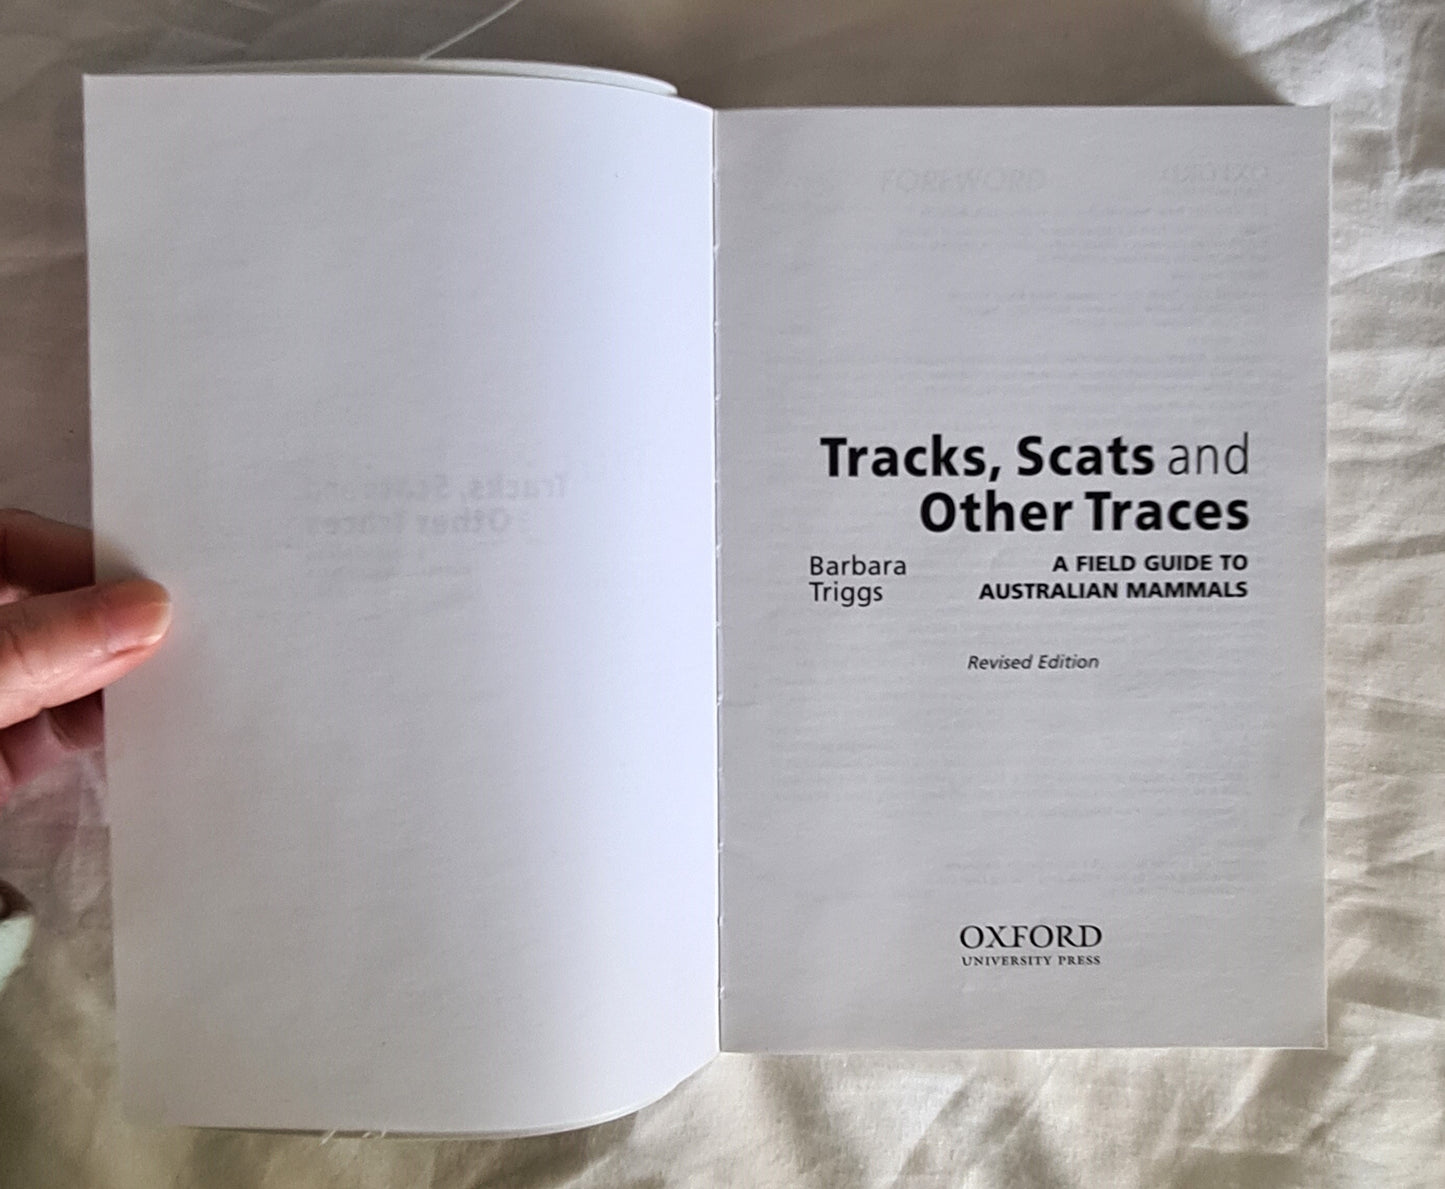 Tracks, Scats and Other Traces by Barbara Triggs